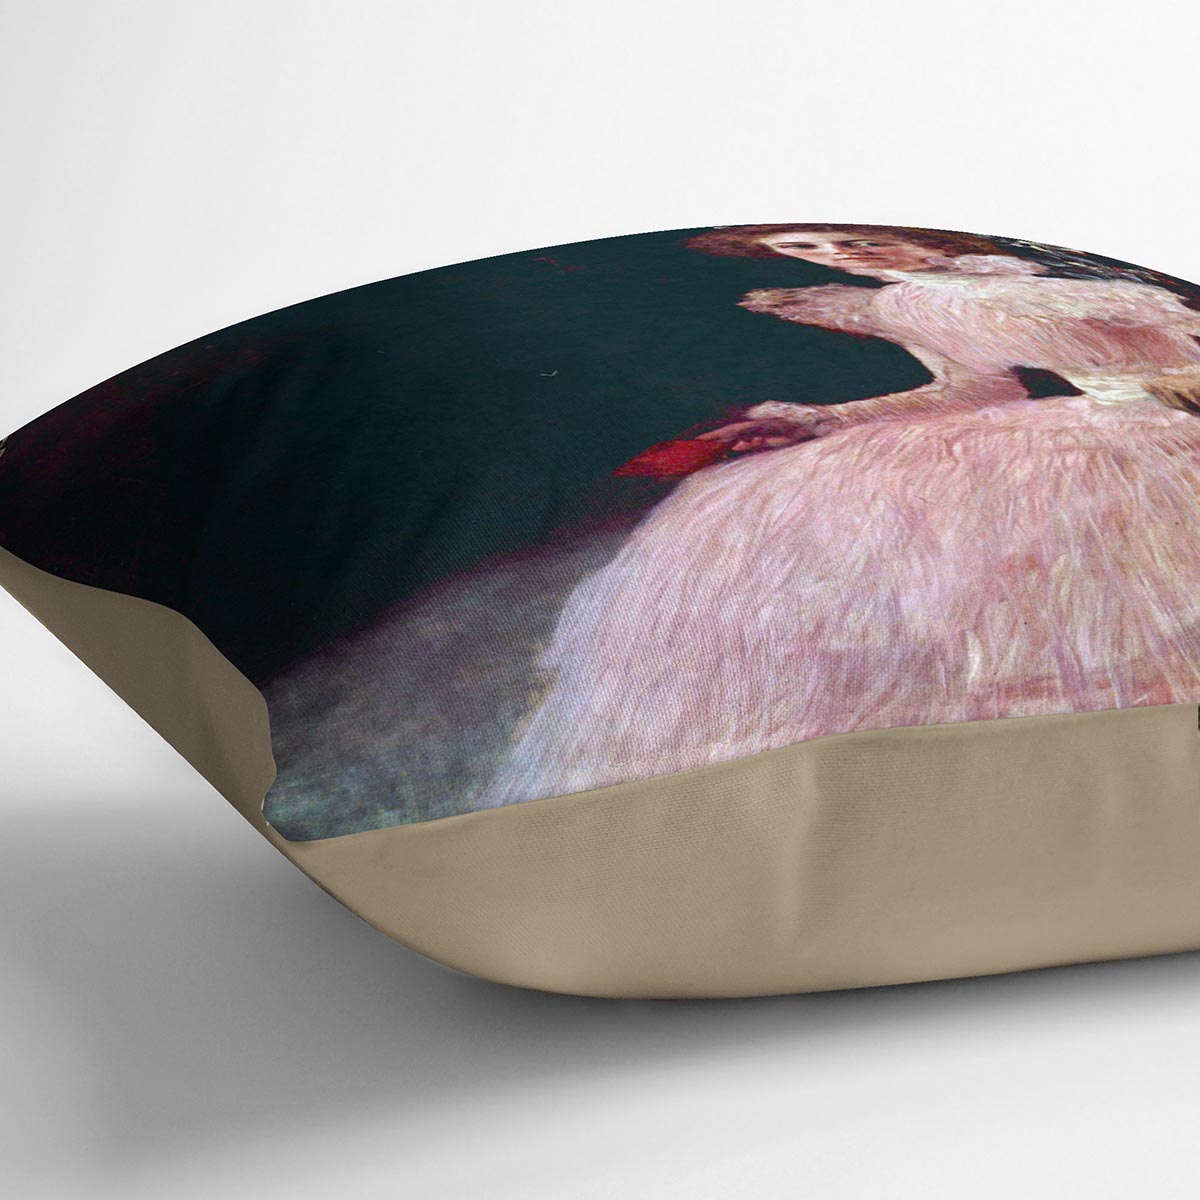 Picture of Sonja Knips by Klimt Cushion